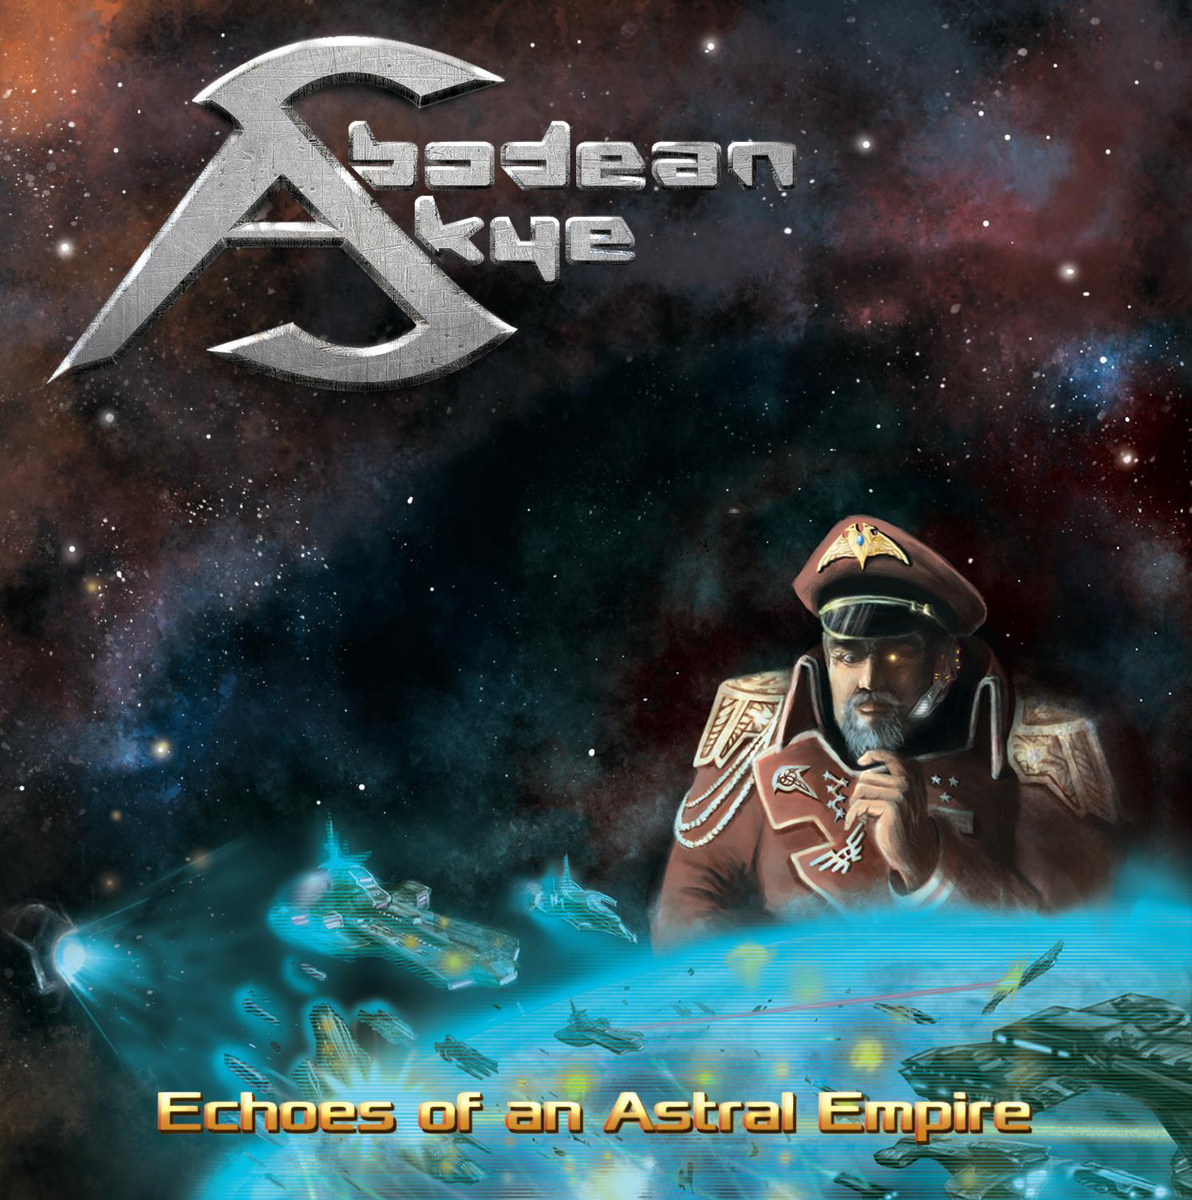 abodean-skye-echoes-of-an-astral-empire